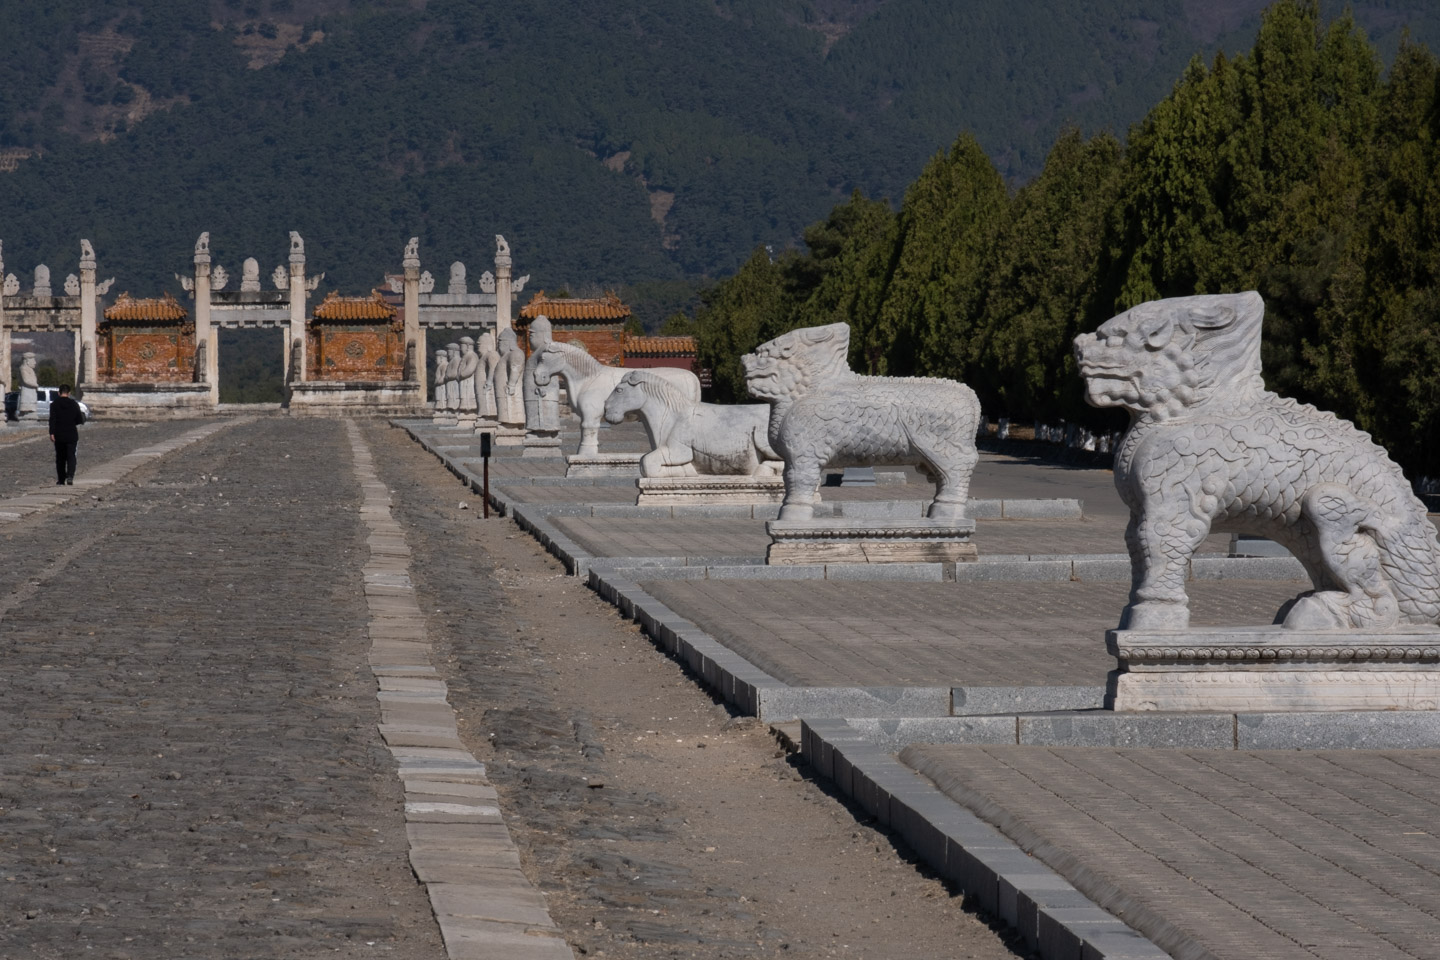 Animal guard at the Eastern Qing Tombs